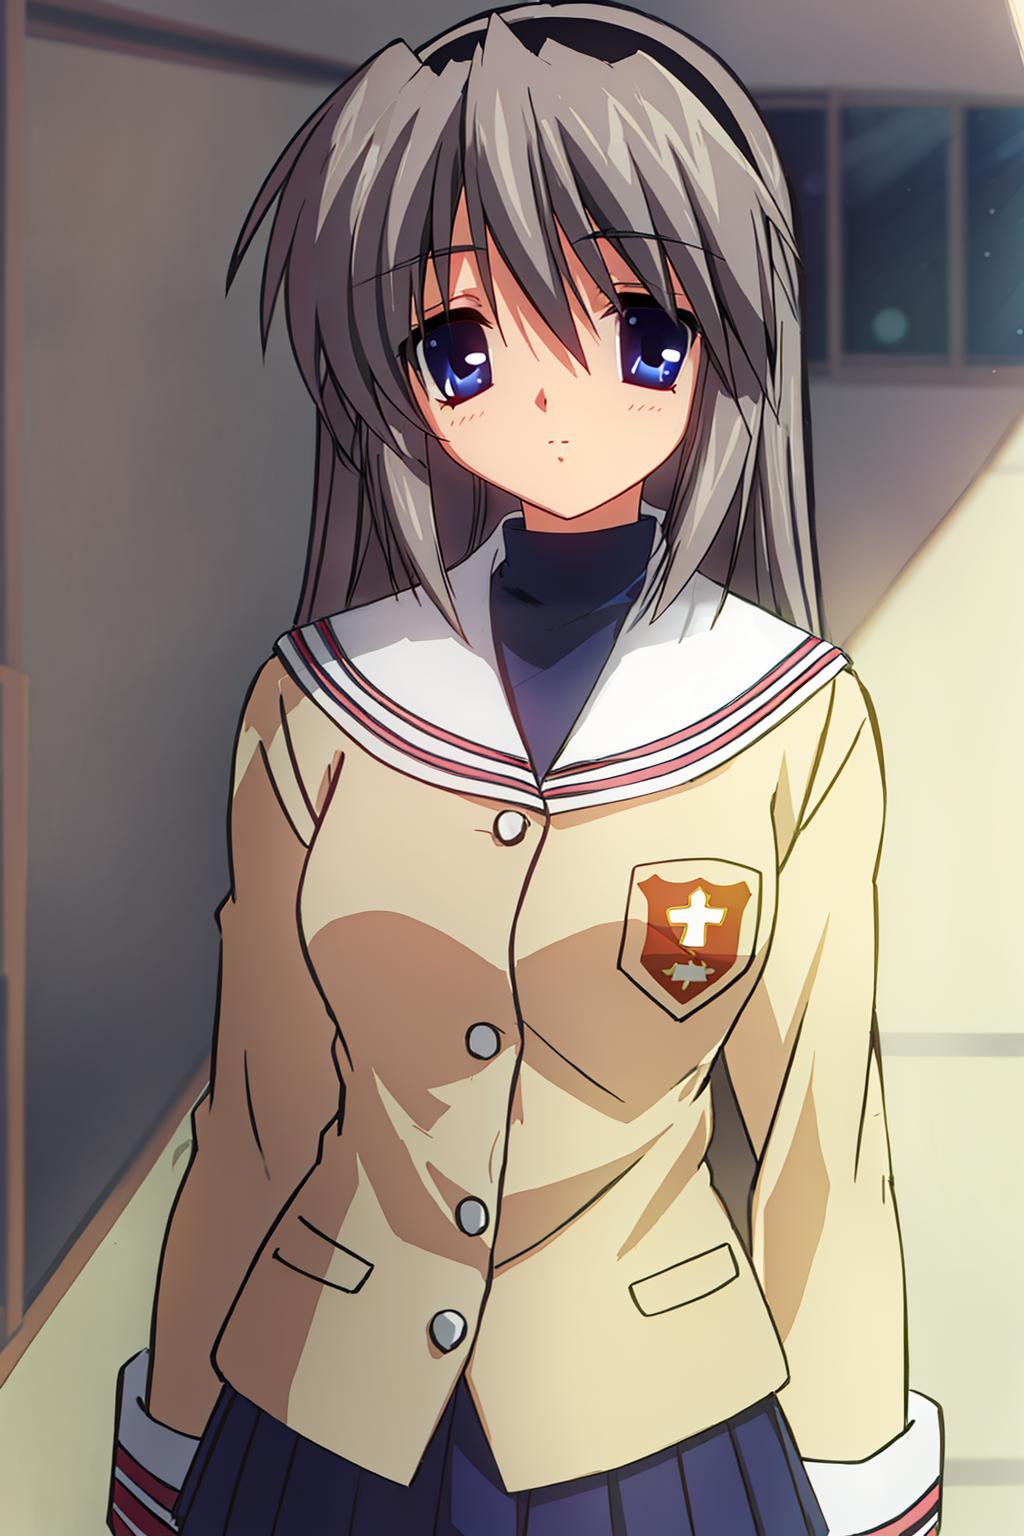 Who Are You From 'Clannad?' - Anime - Quizkie